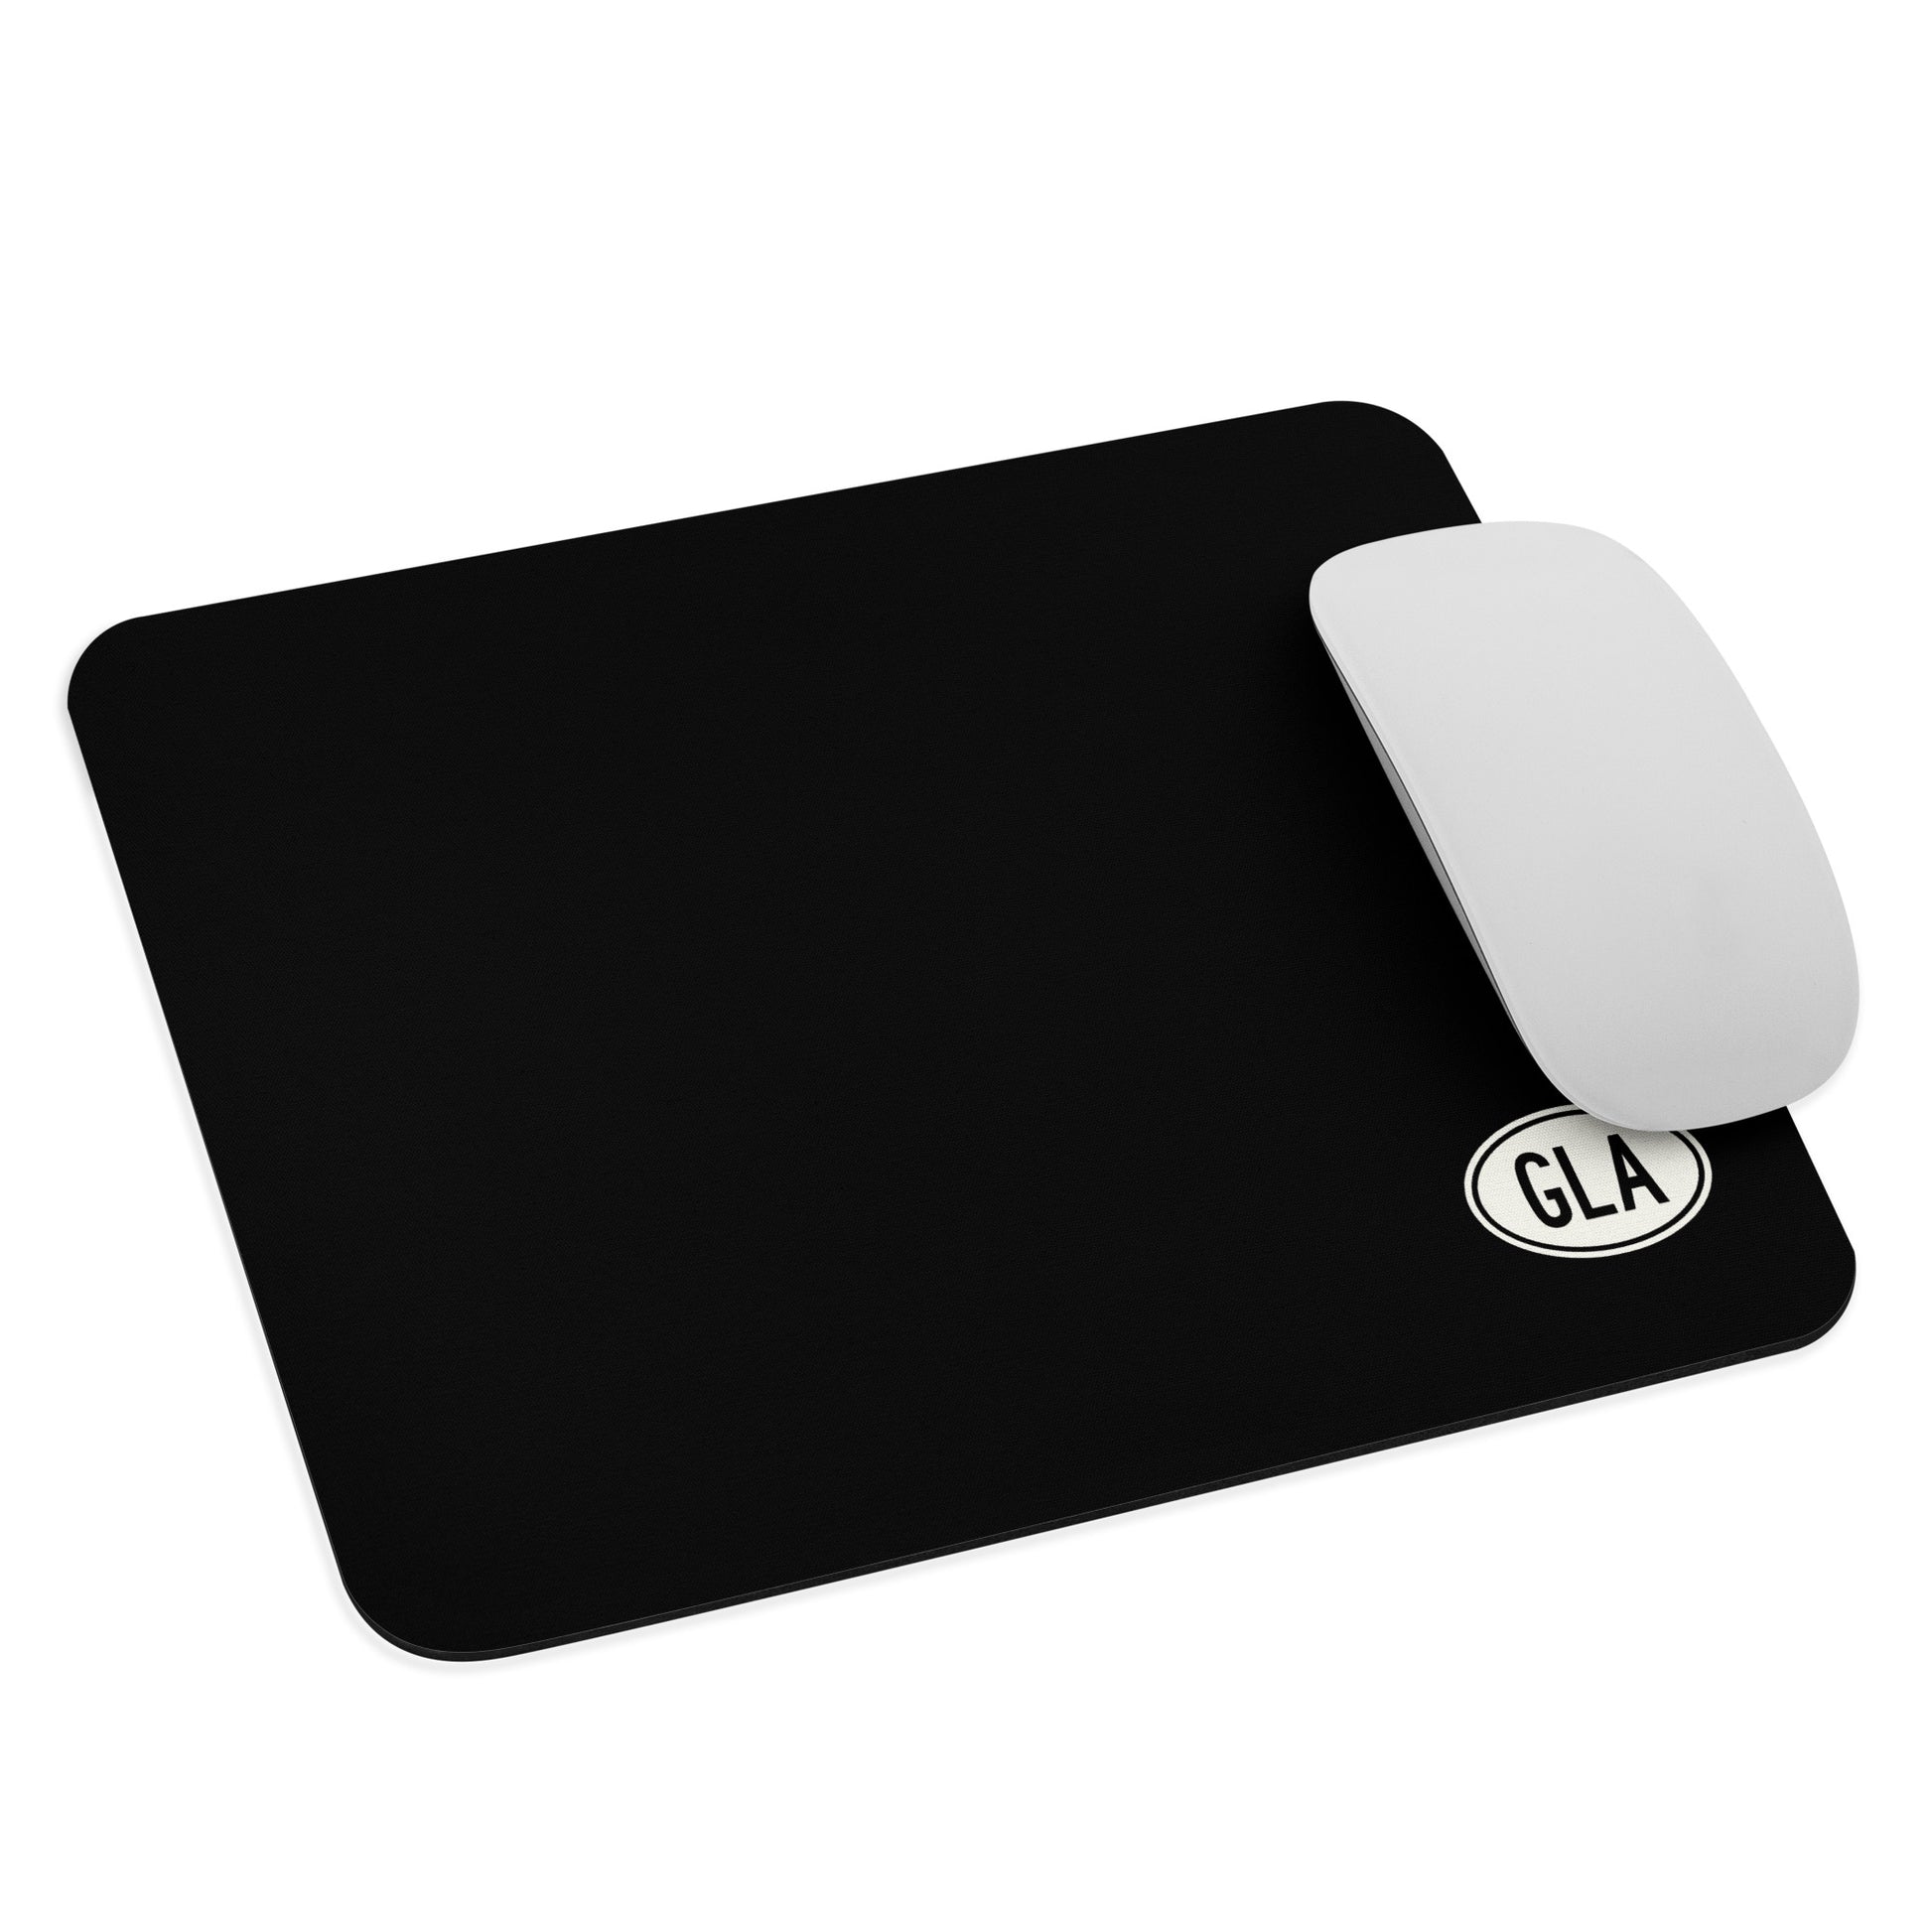 Unique Travel Gift Mouse Pad - White Oval • GLA Glasgow • YHM Designs - Image 03